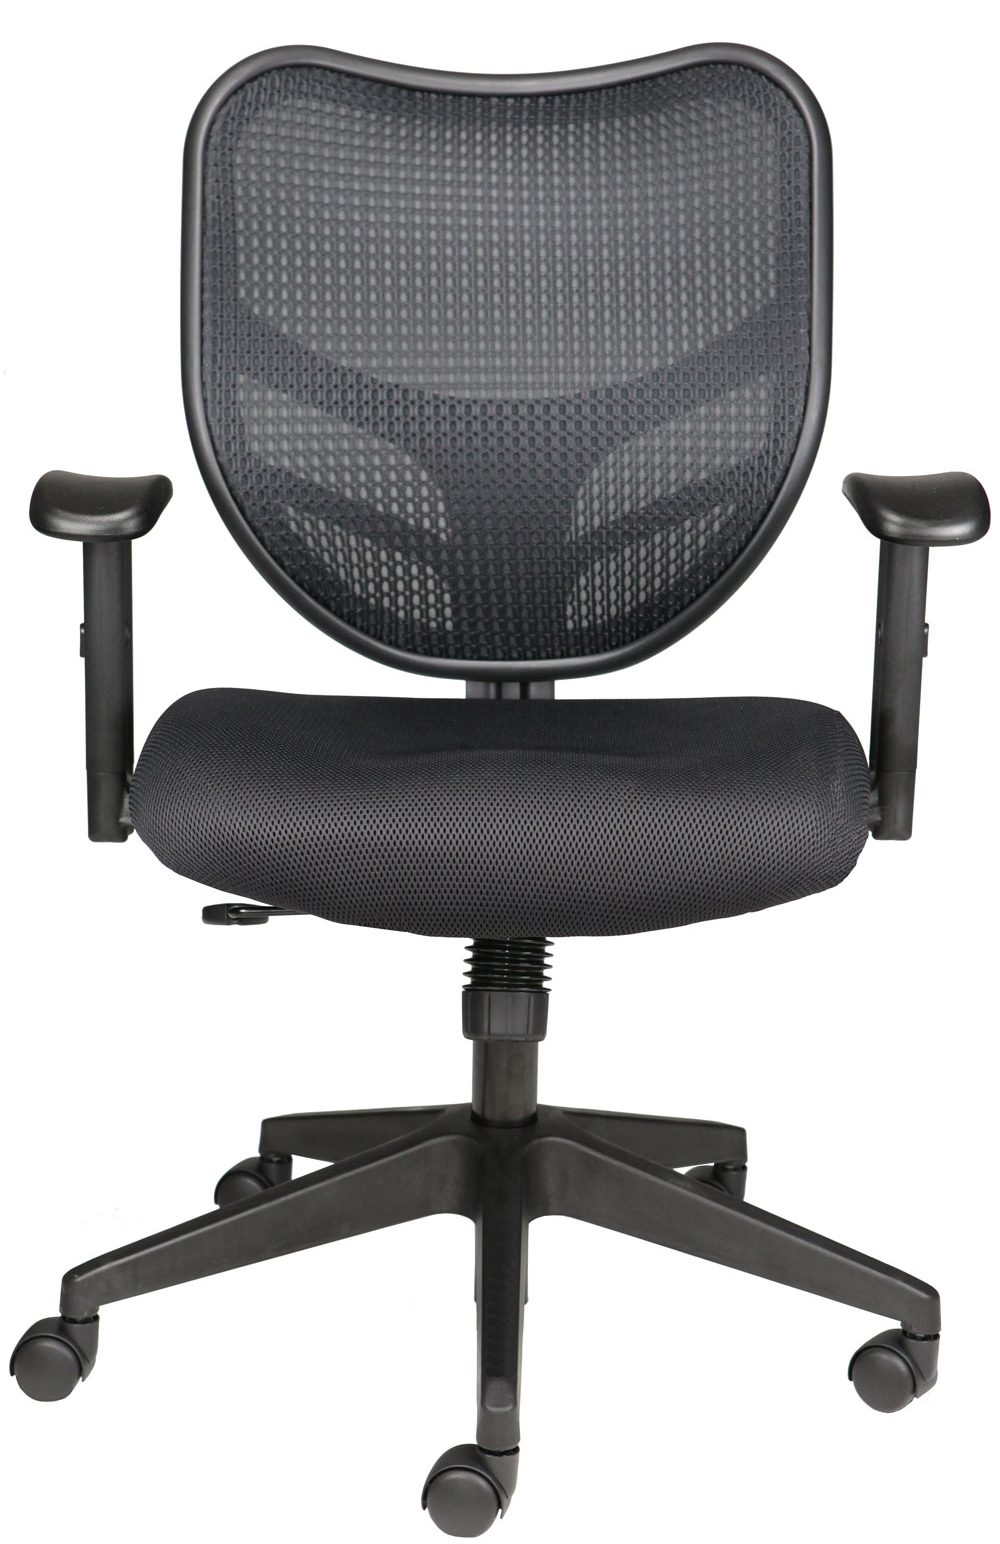 https://buzzseating.com/wp-content/uploads/2019/05/dandy-general-purpose-office-chair-front-view-e1556933713719.jpg